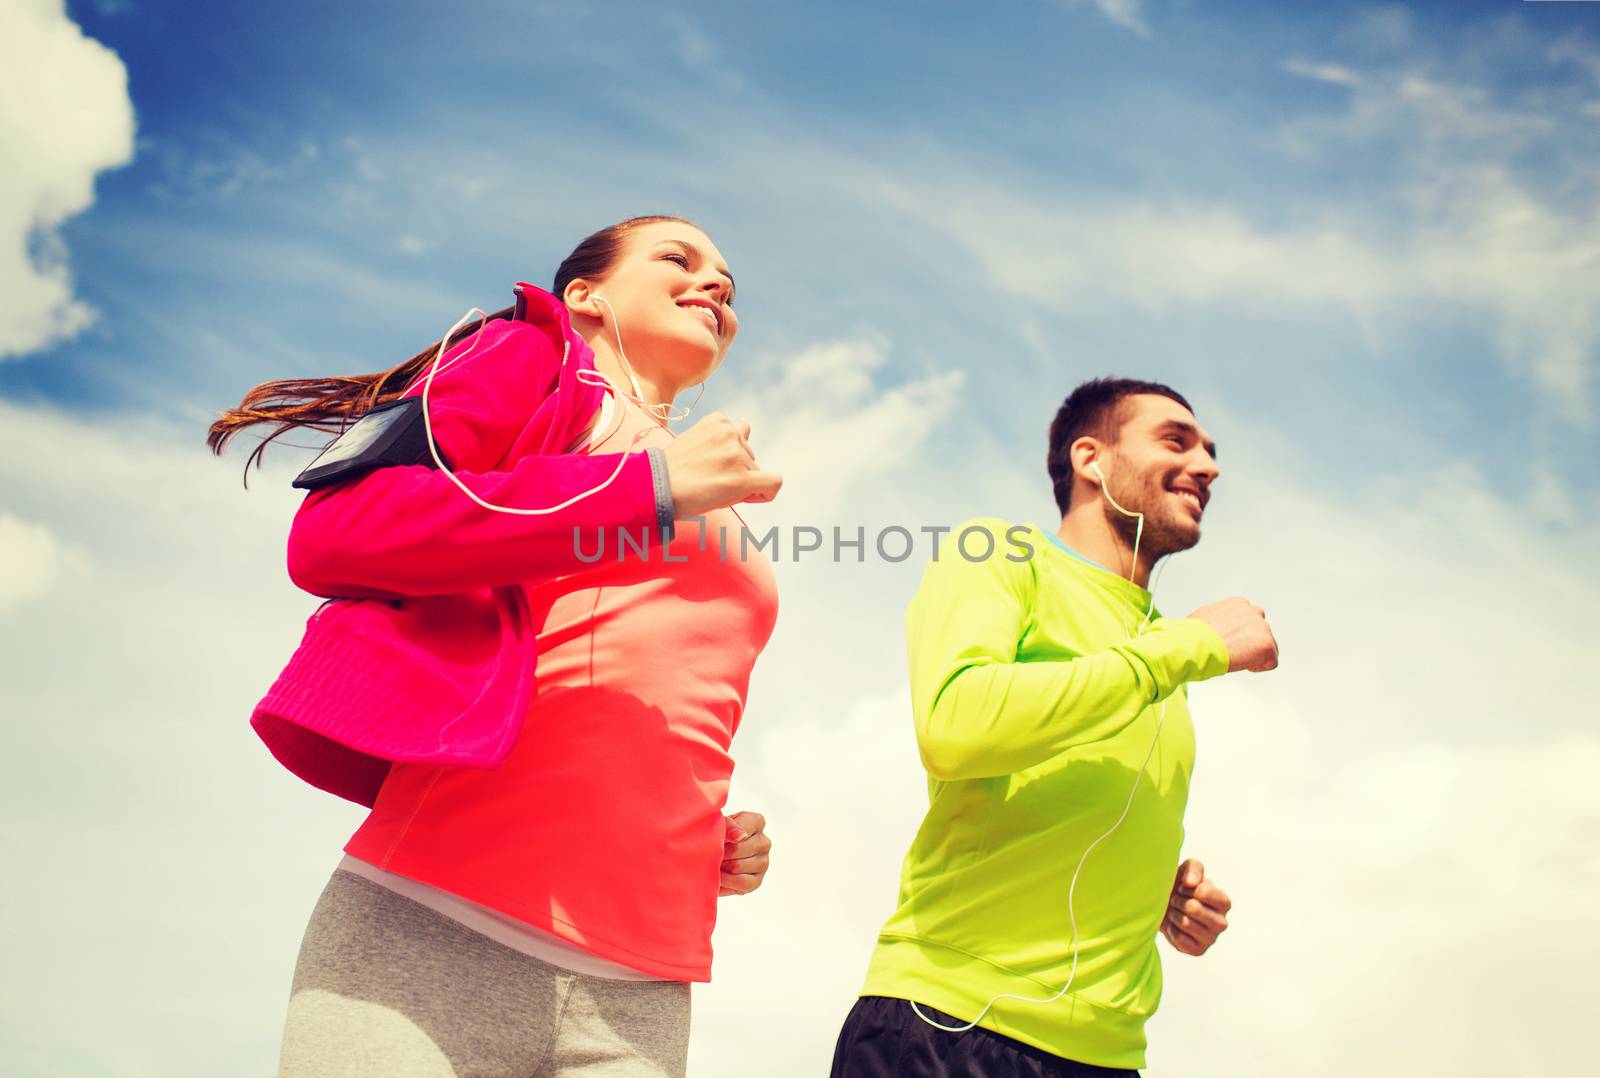 fitness, sport, friendship and lifestyle concept - smiling couple with earphones running outdoors